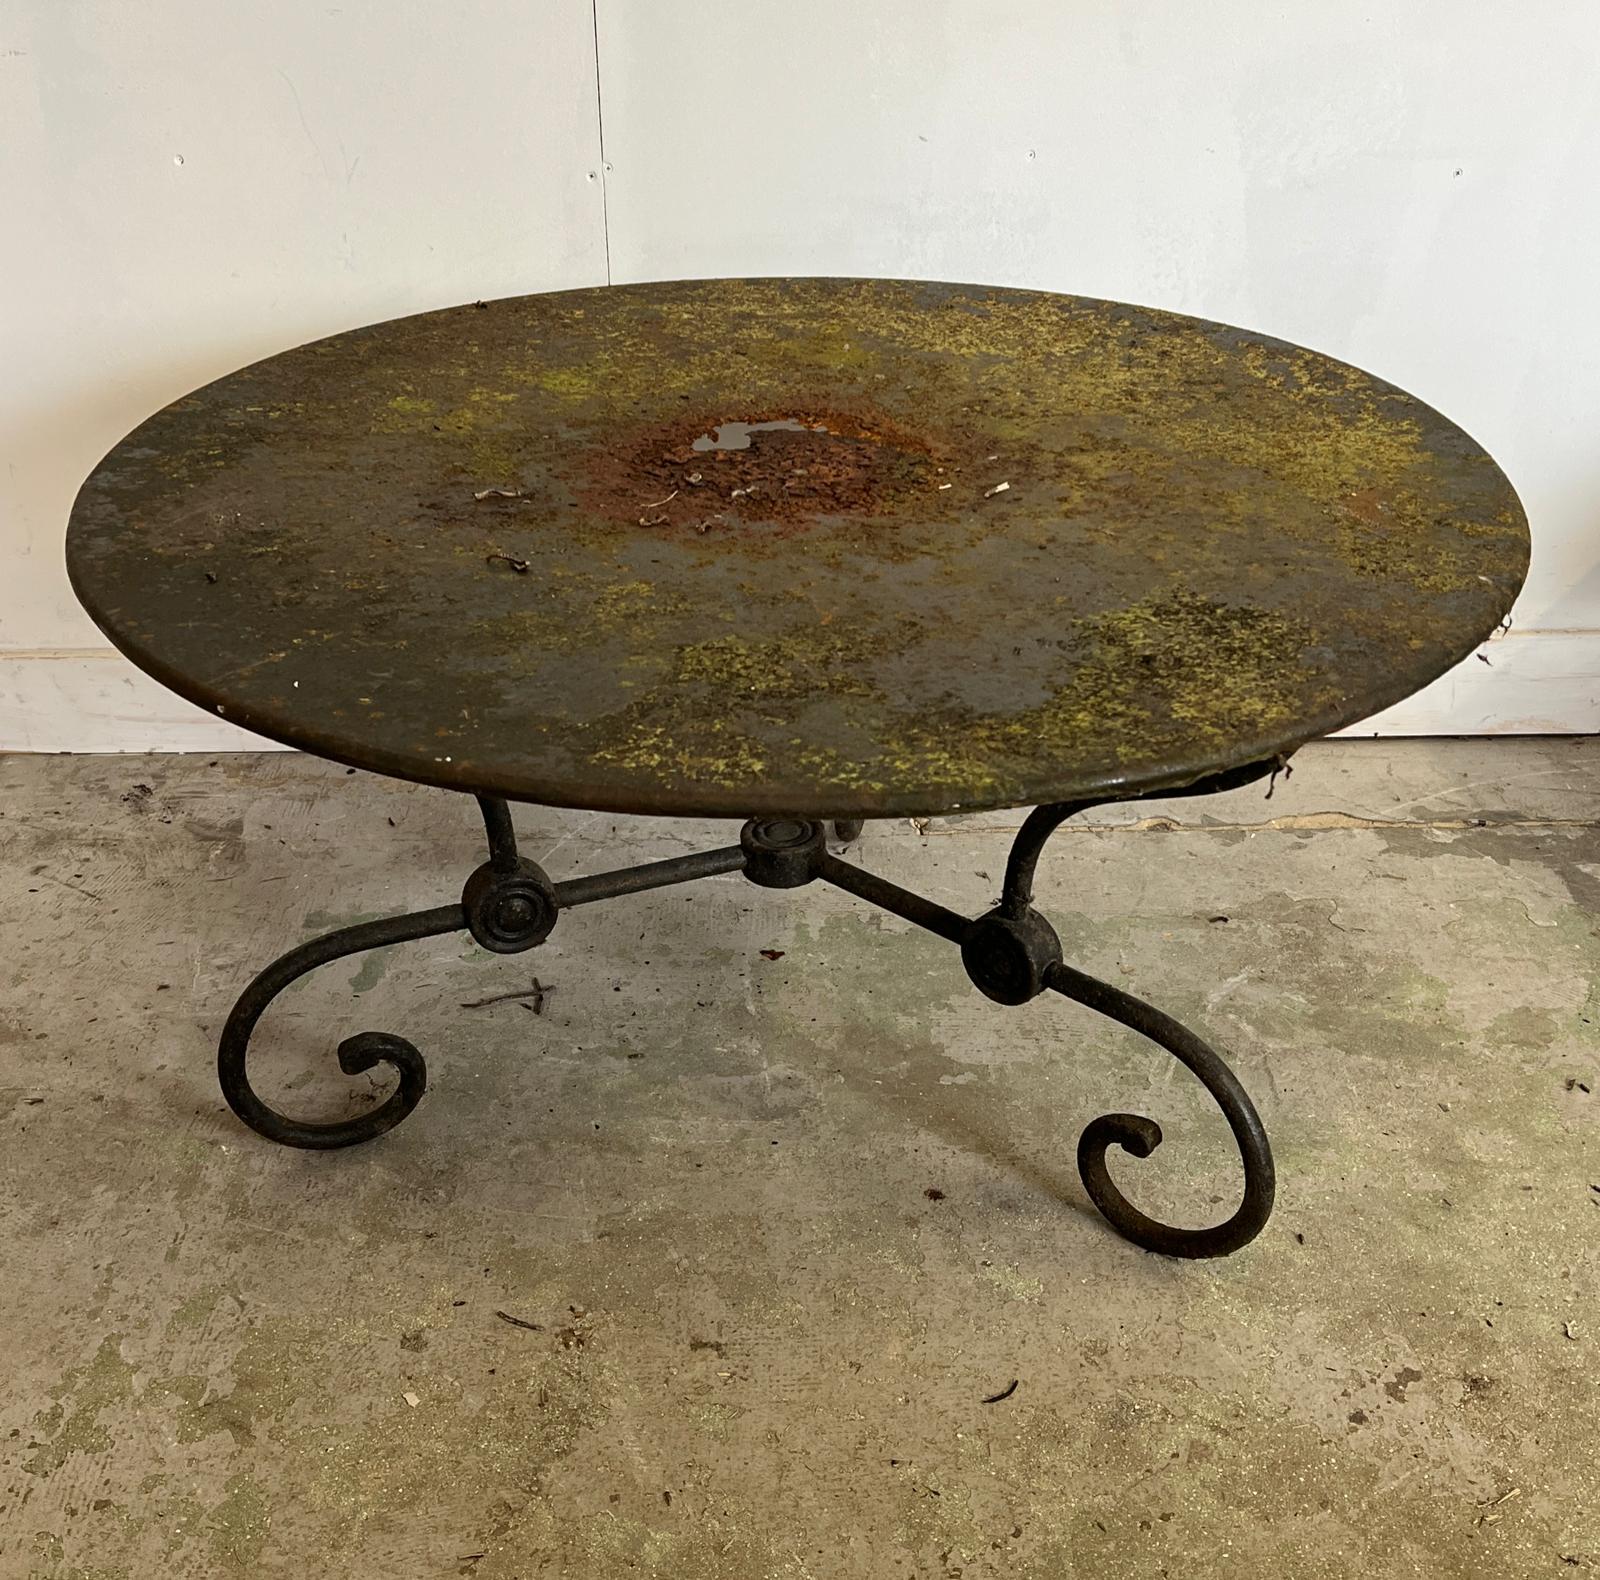 French style round decorative garden table with scrolling iron work legs (H54cm Dia100cm)